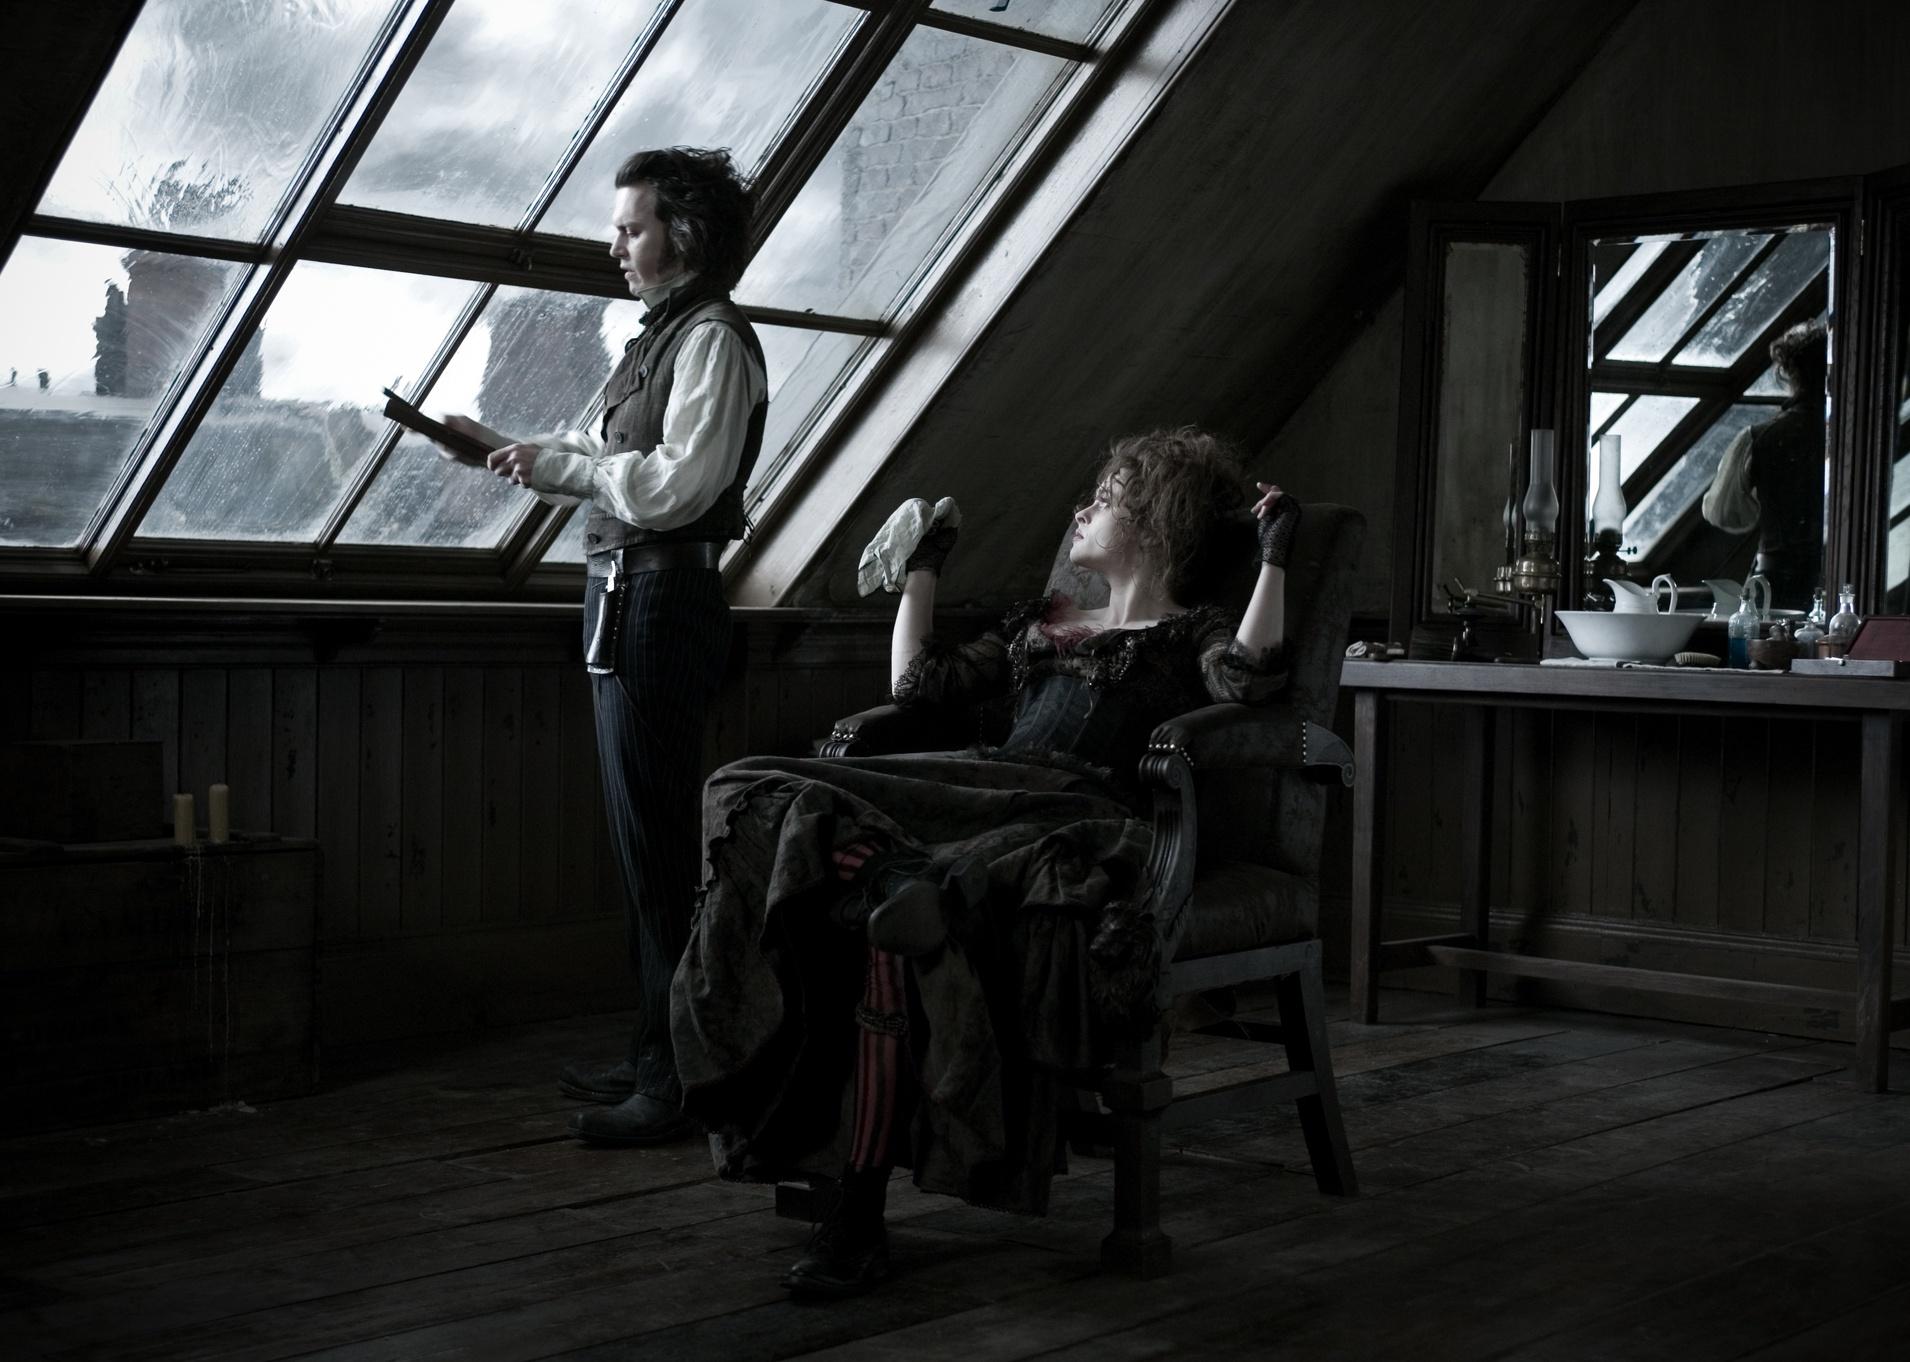 Johnny Depp sharpens his barber knife and Helena Bonham Carter sits in the chair talking with him.